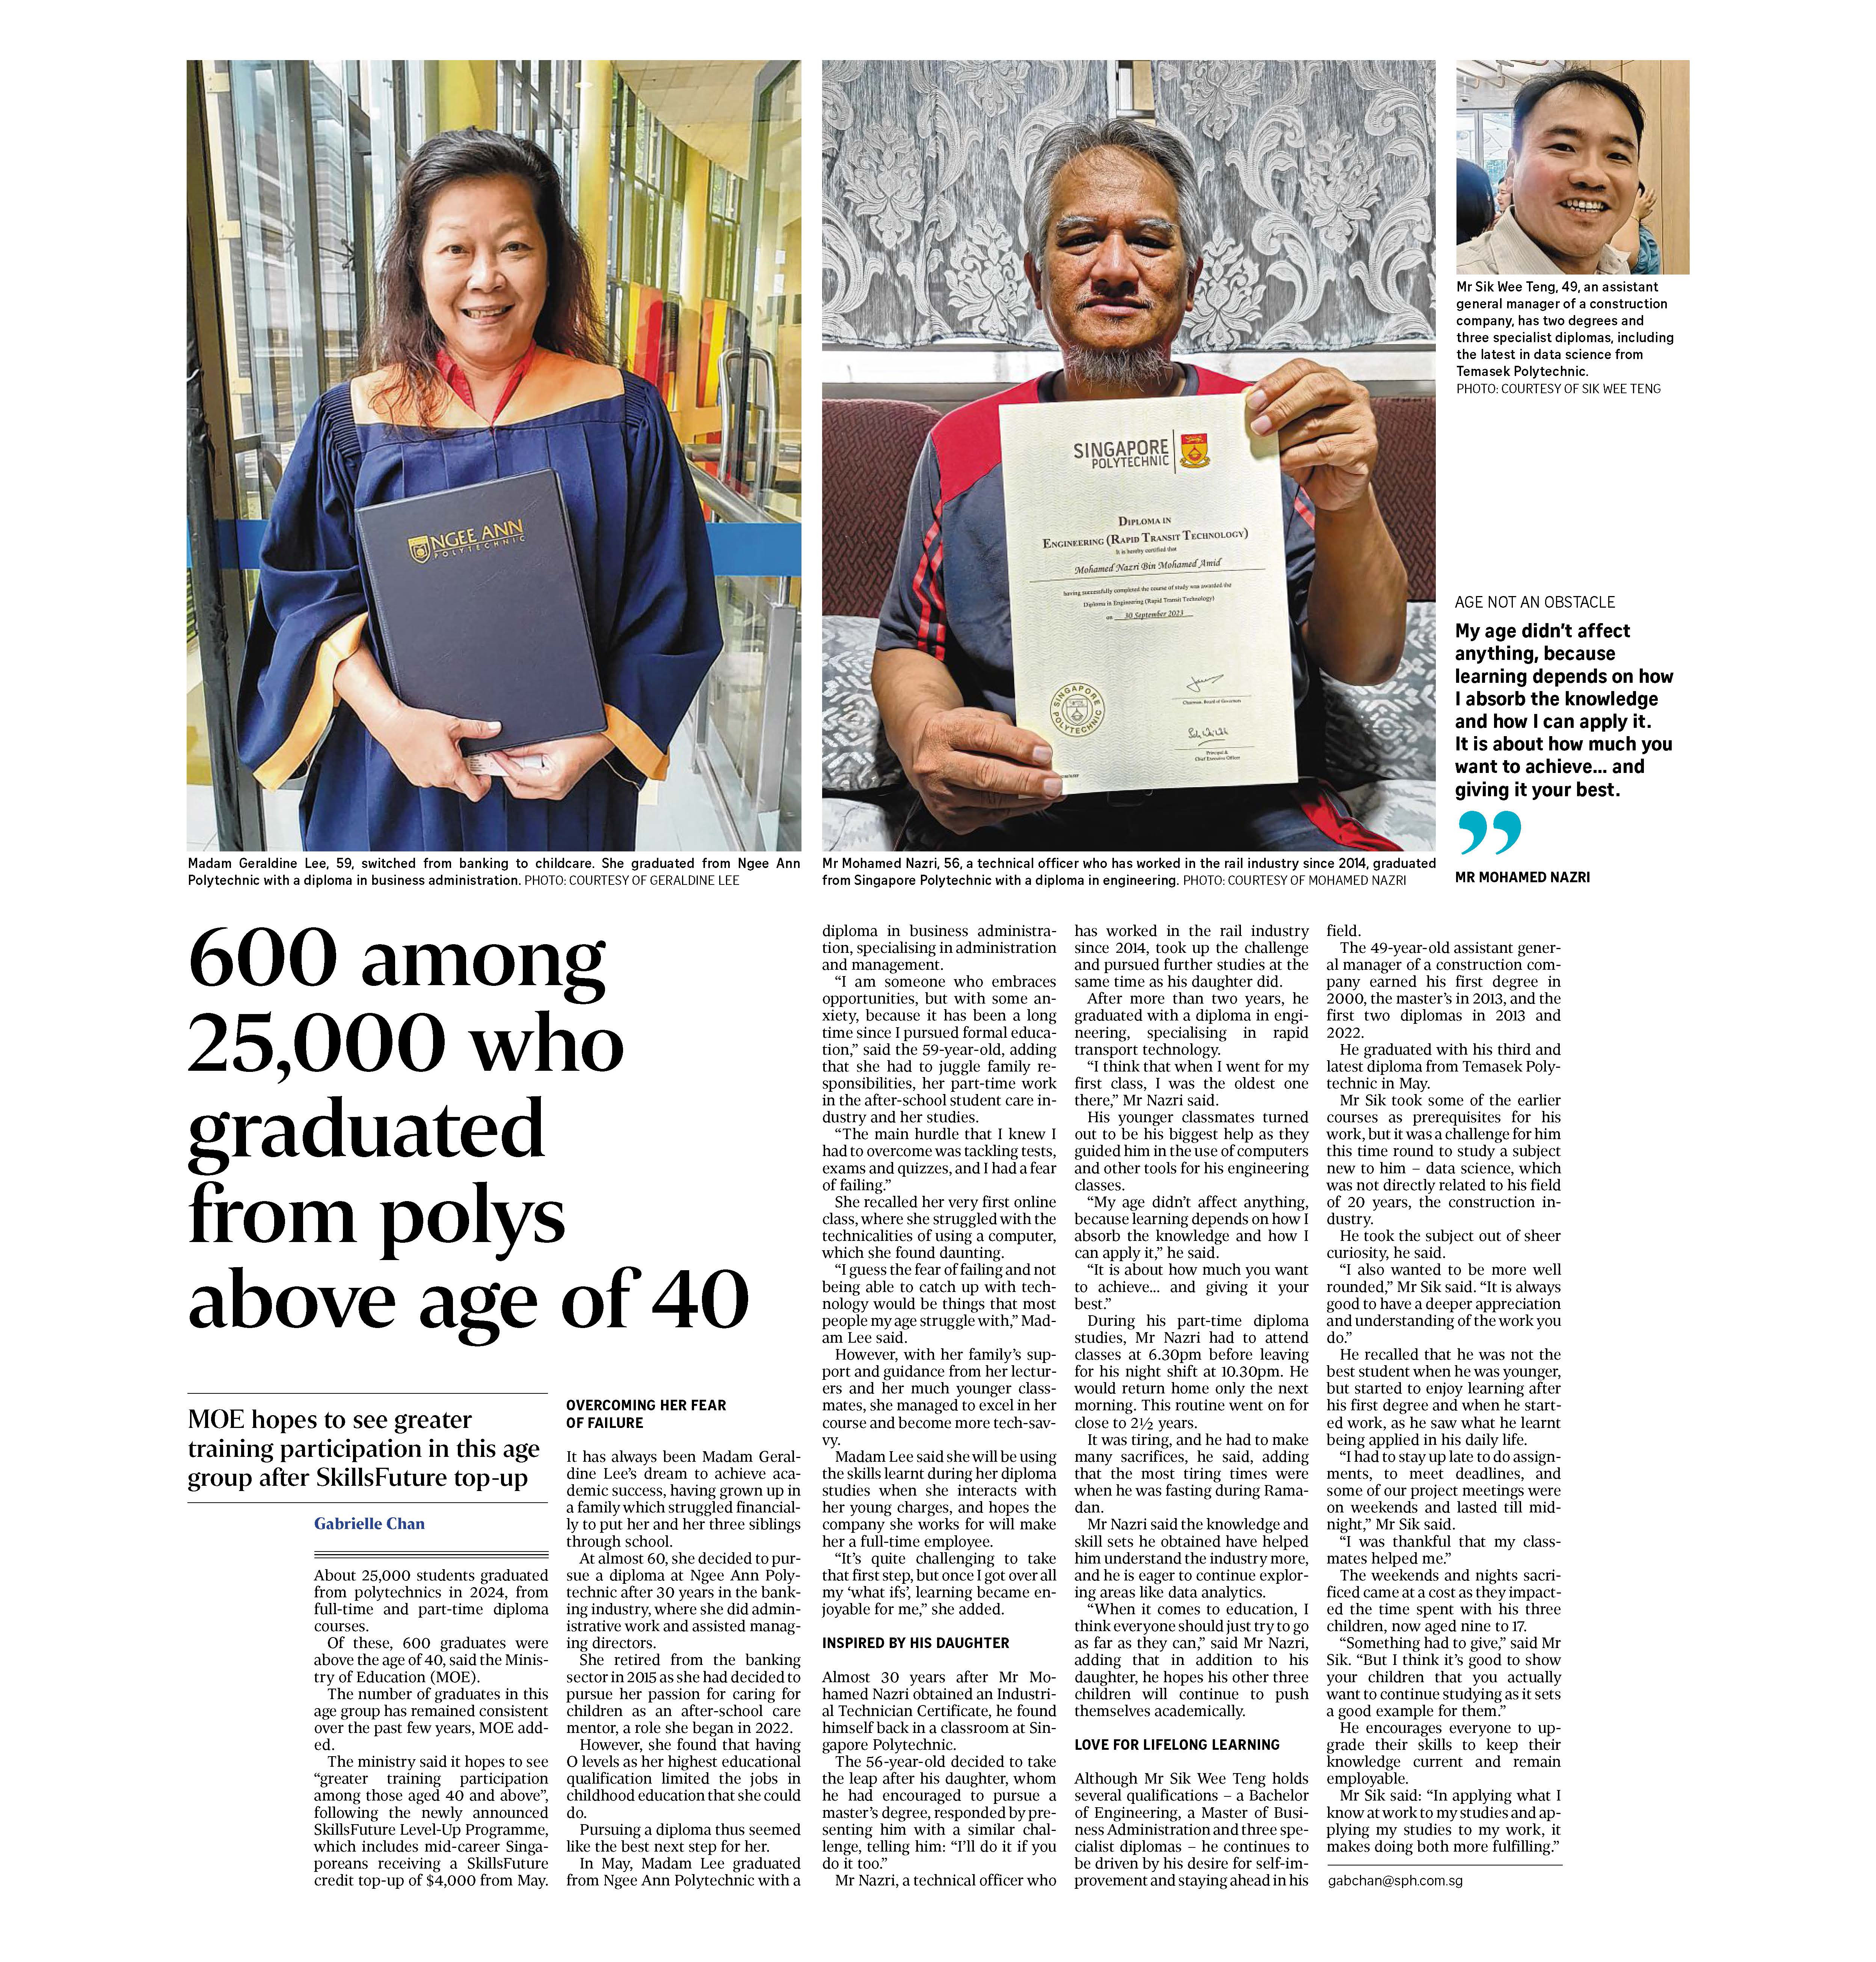 600 students above age of 40 graduate from polytechnics; man, 56, pursued further studies at the same time as daughter